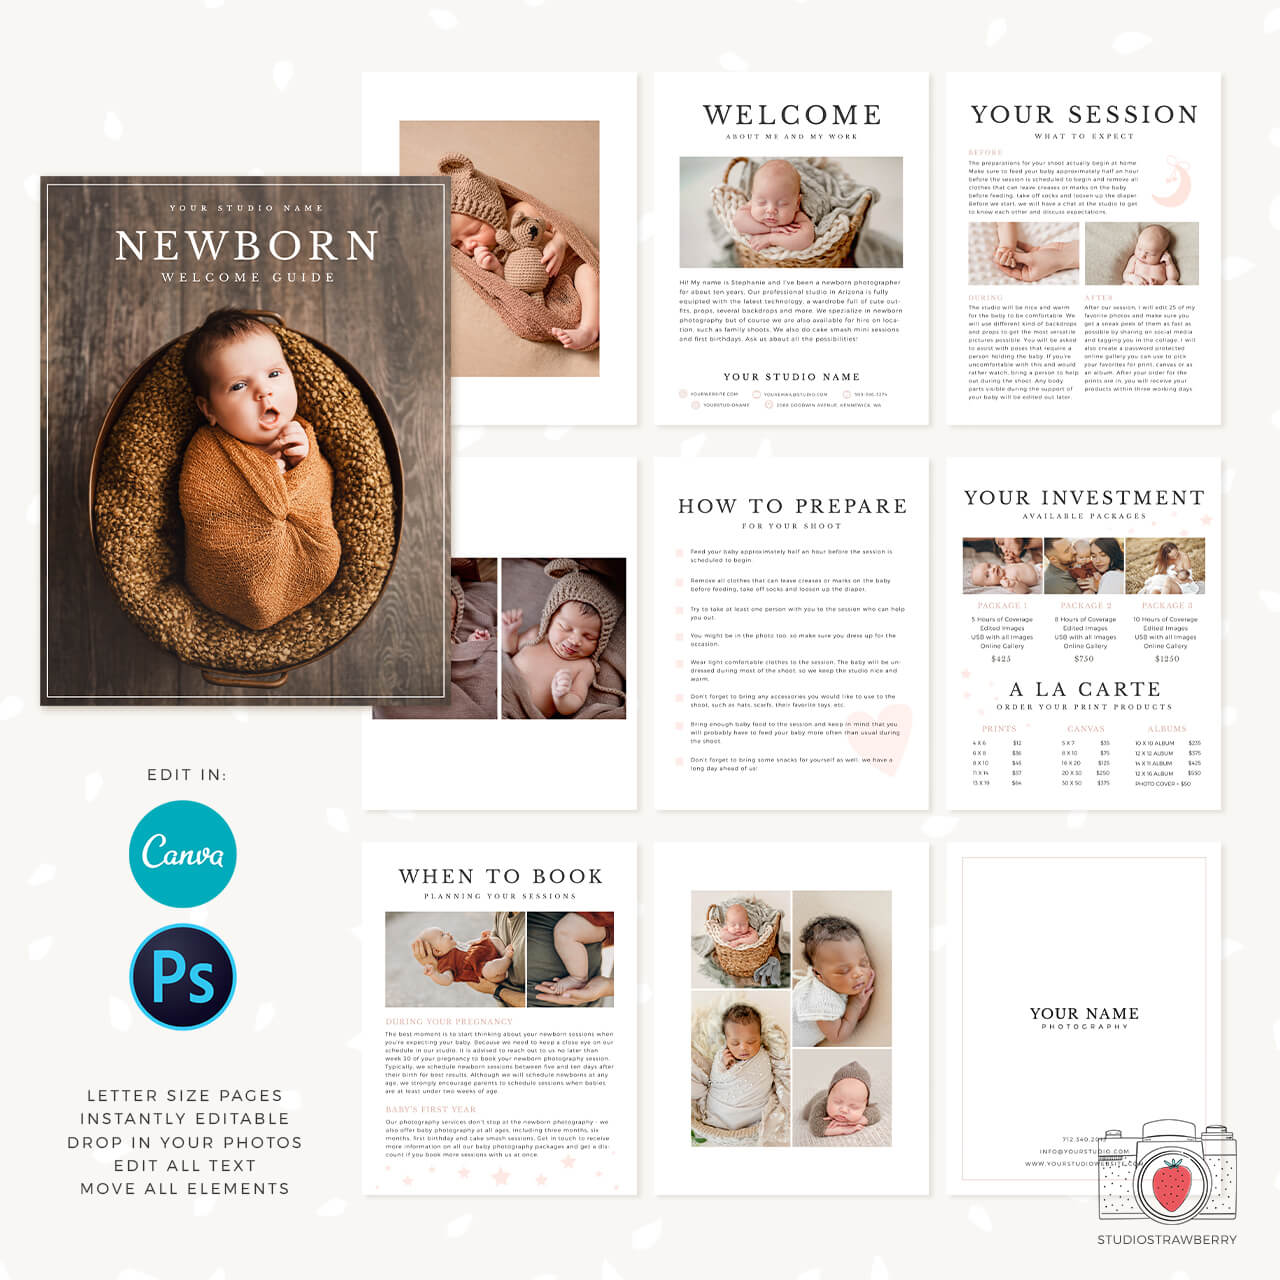 Baby Photo Album Template, Photo Book Template, Newborn Album, Photoshop  Album, Photoshop Template, INSTANT DOWNLOAD 